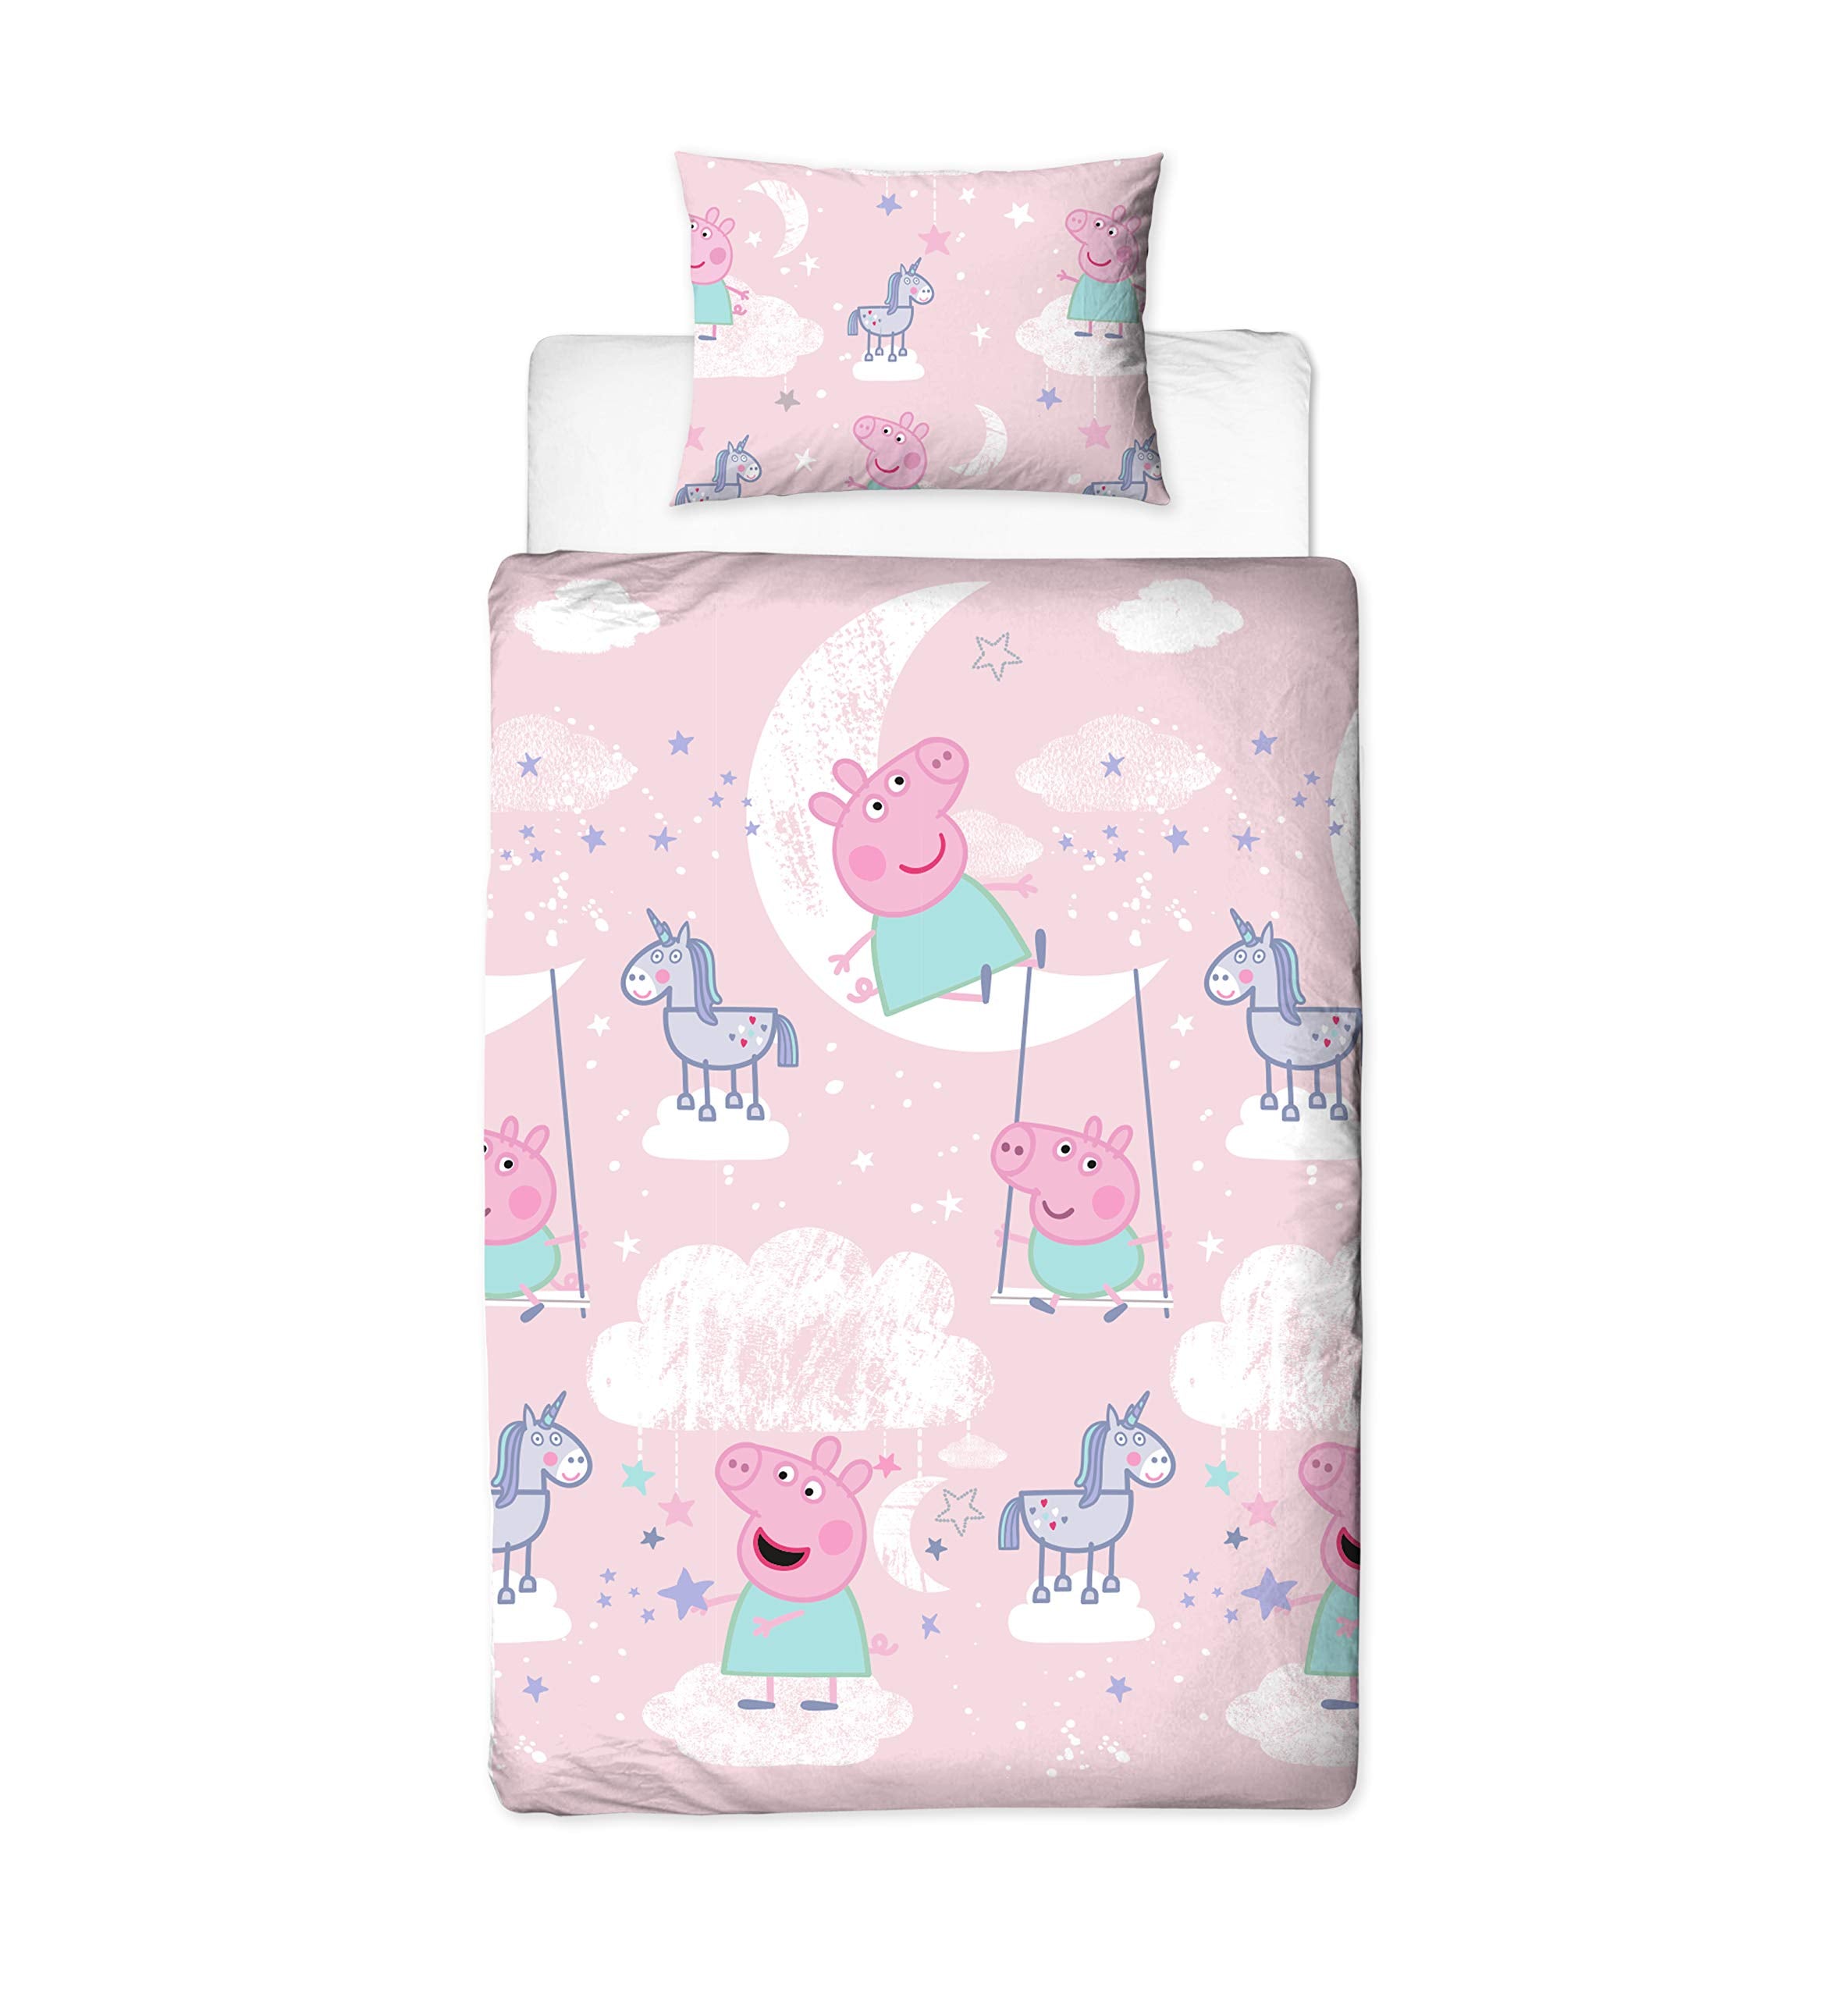 Character World Peppa Pig Stardust Official Single Duvet Cover | Unicorn Magical Stardust Design Duvet | Officially Licensed Pink Polycotton Reversible Two Sided Design